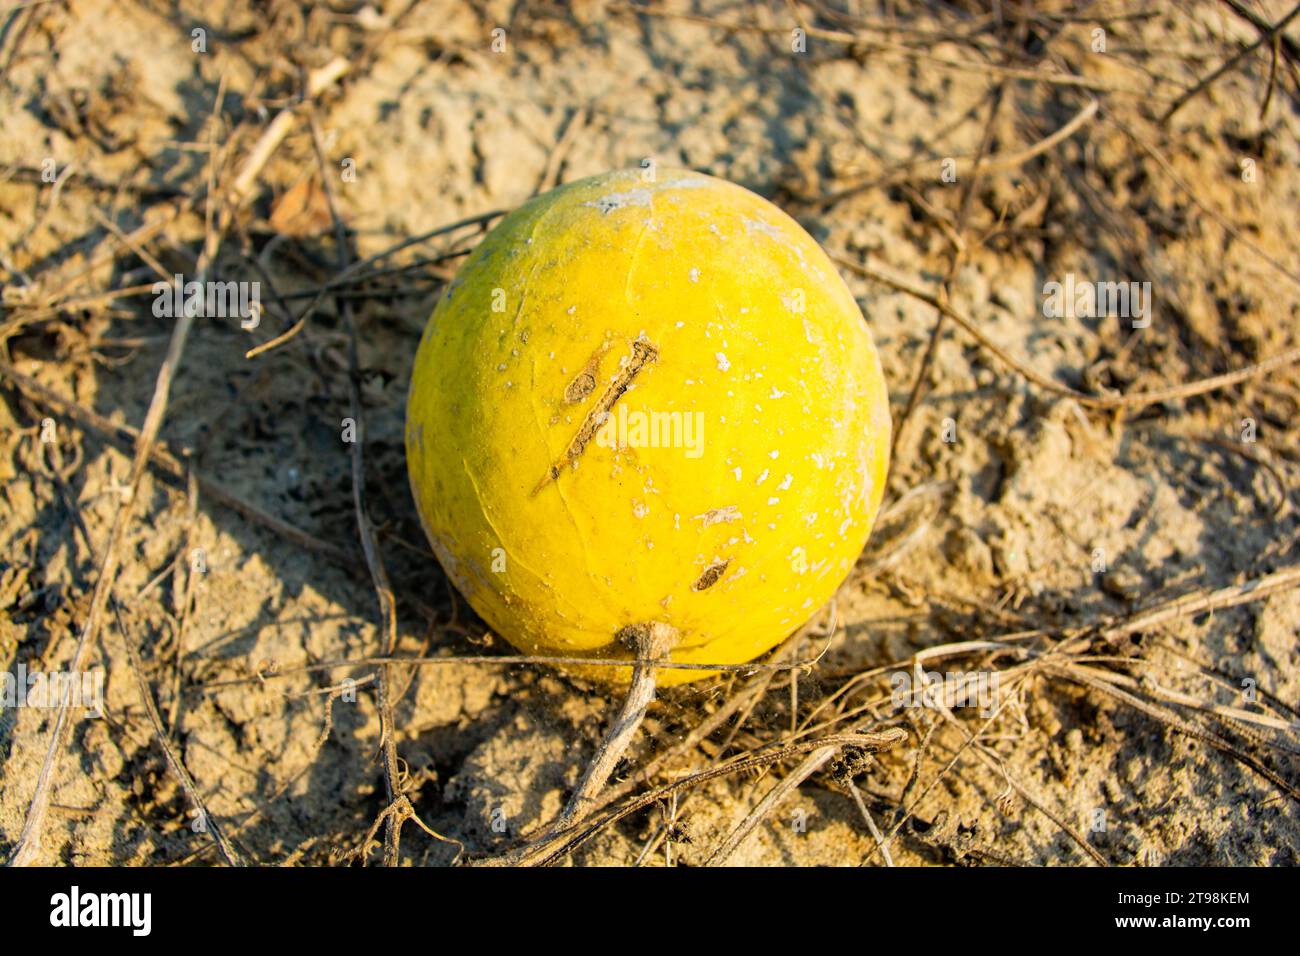 Bitter apple or Citrullus colocynthis herb in the desert Stock Photo